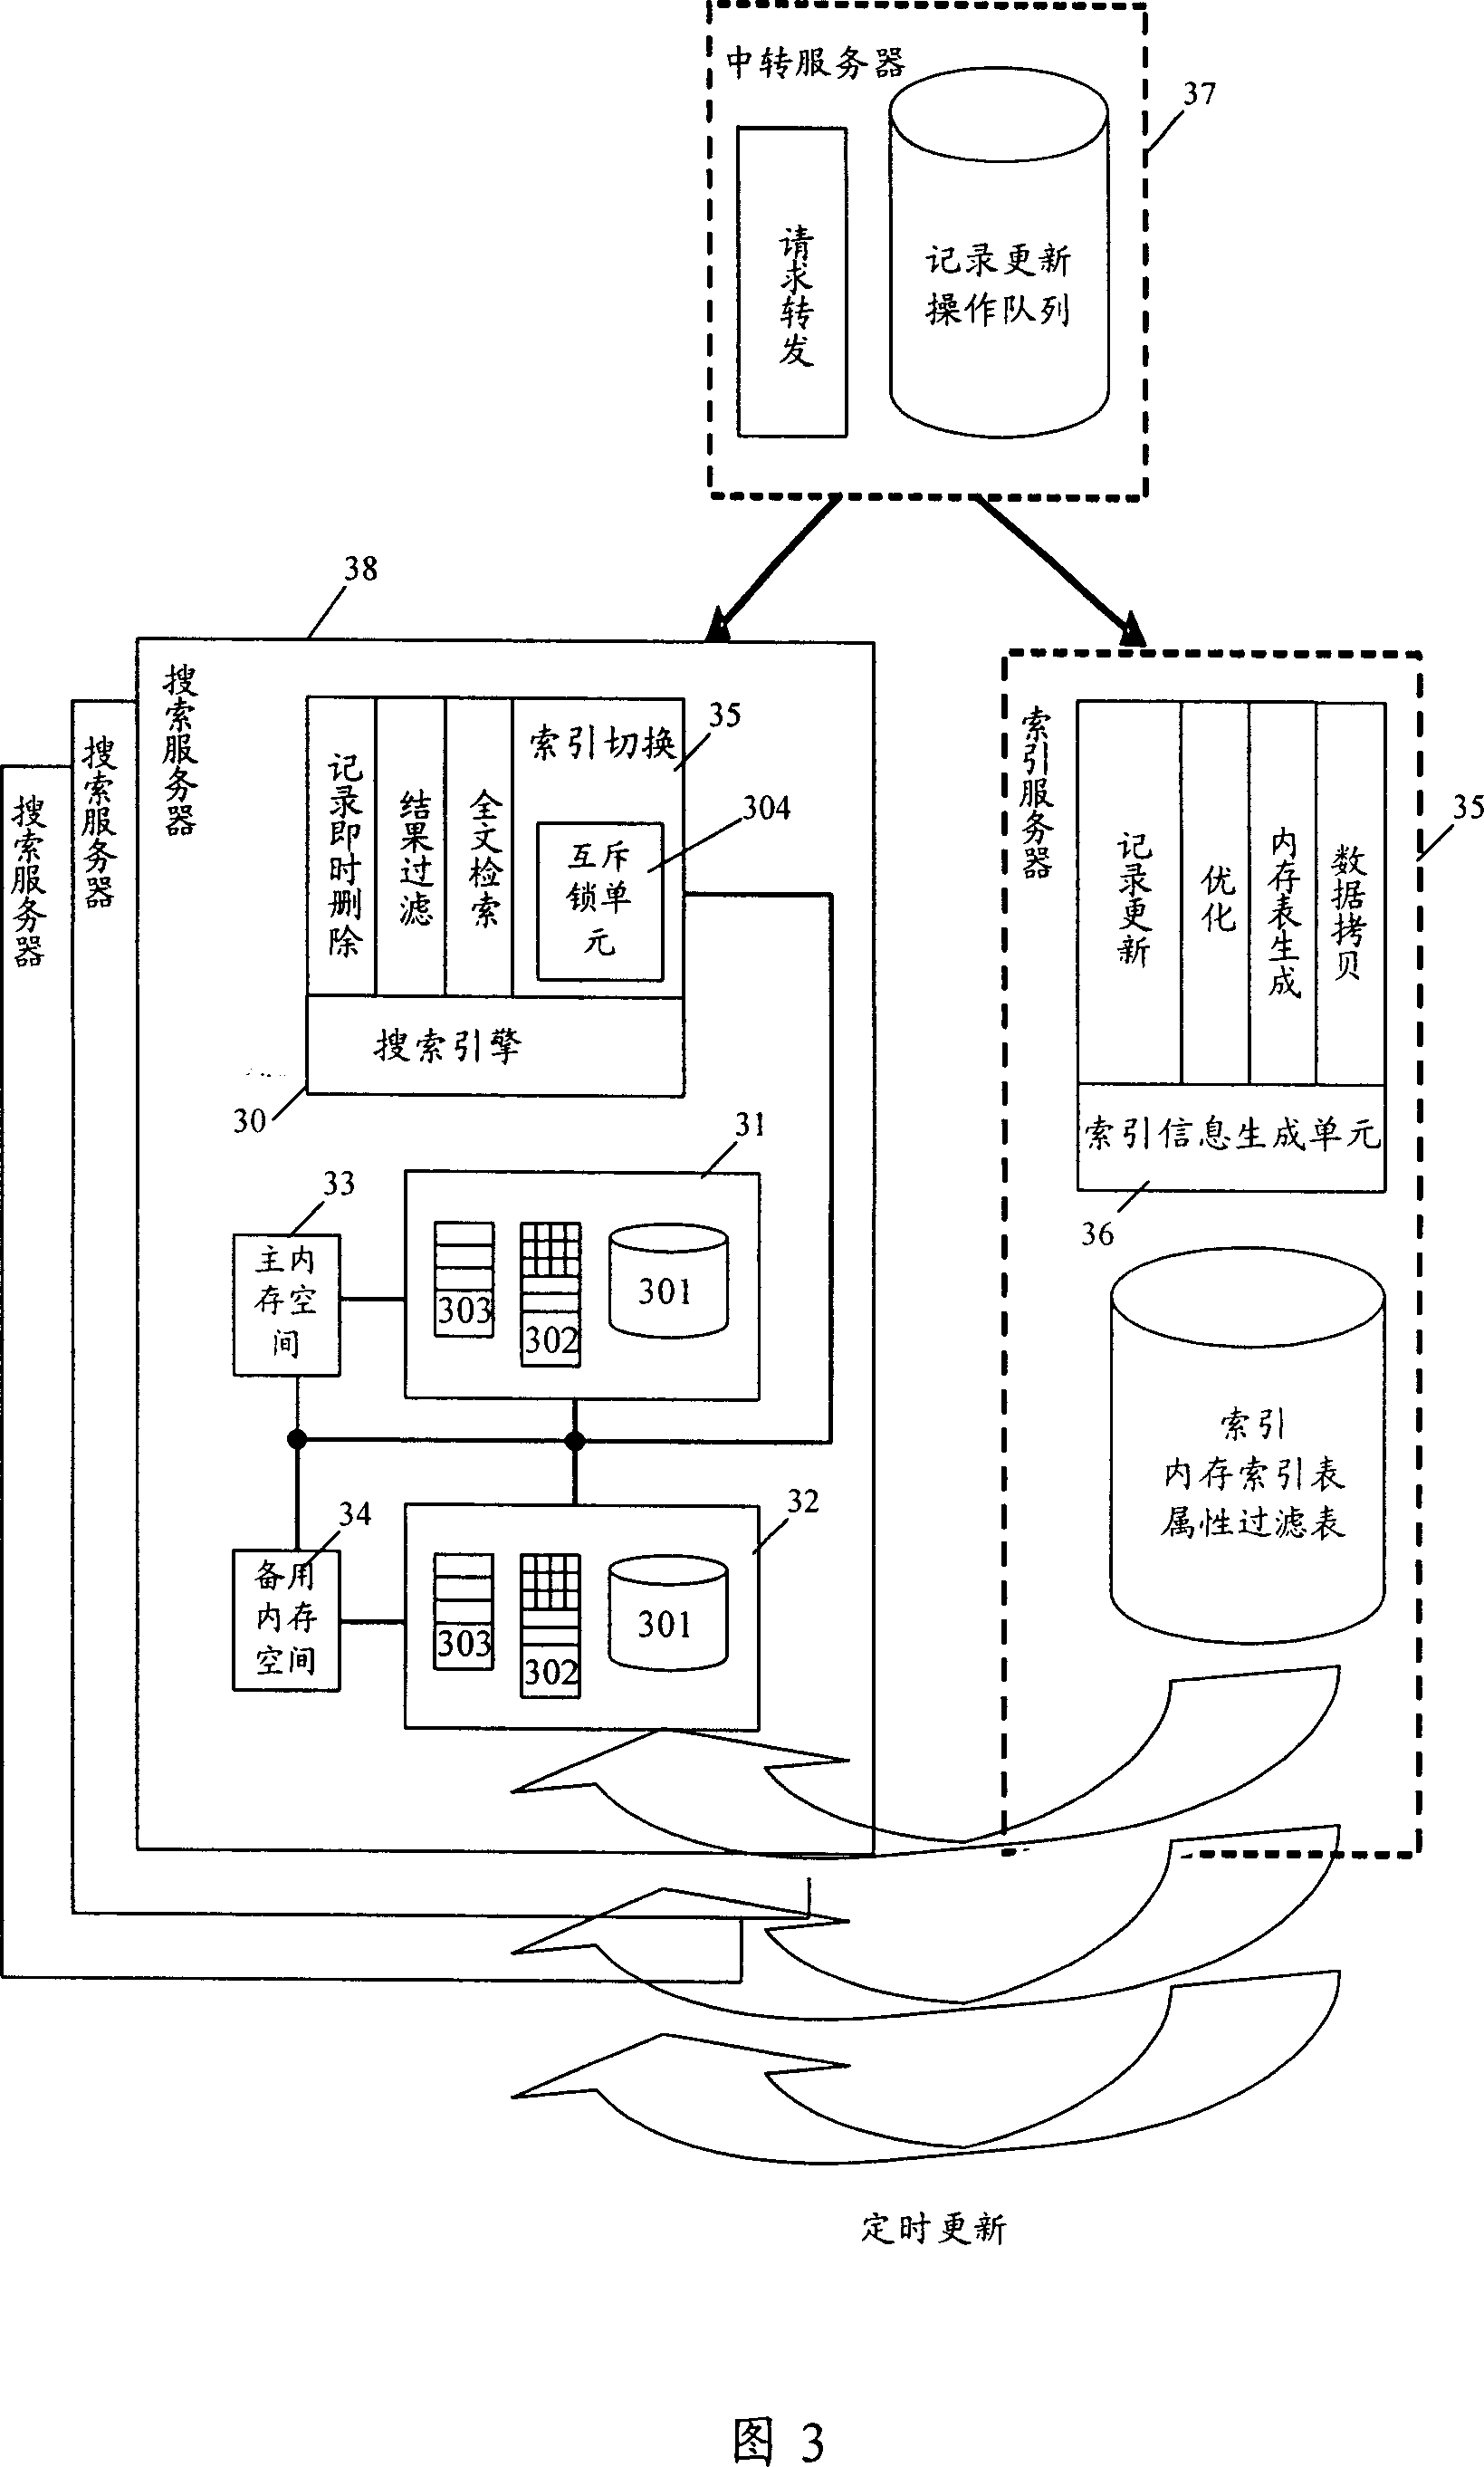 Search system index switching method and search system